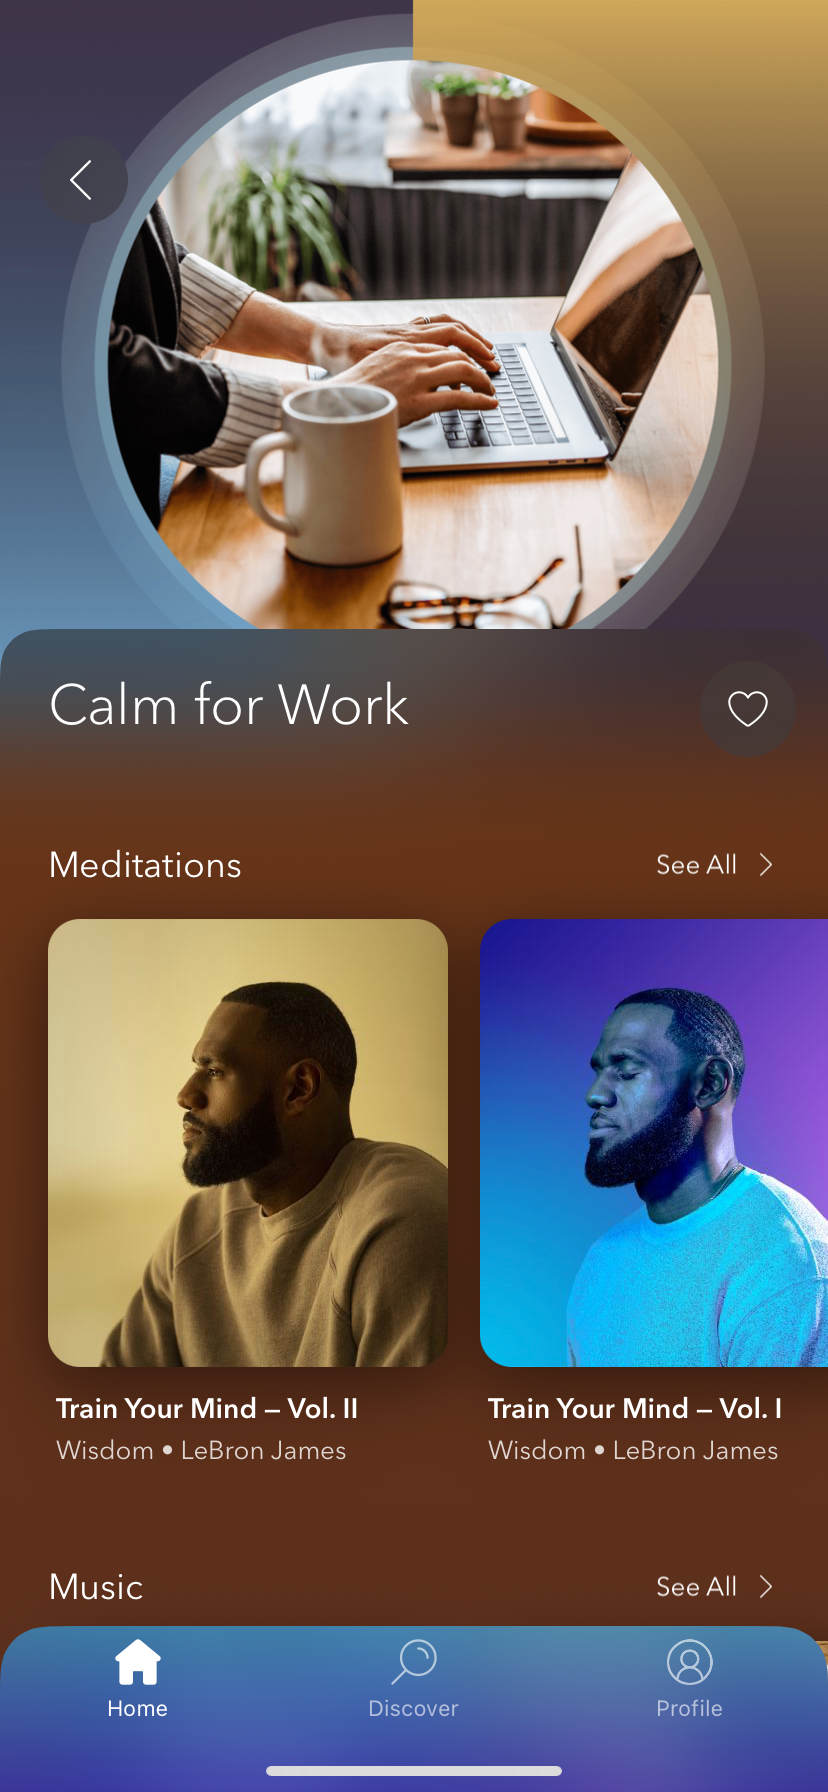 Image shows the Calm for Work section inside Calm